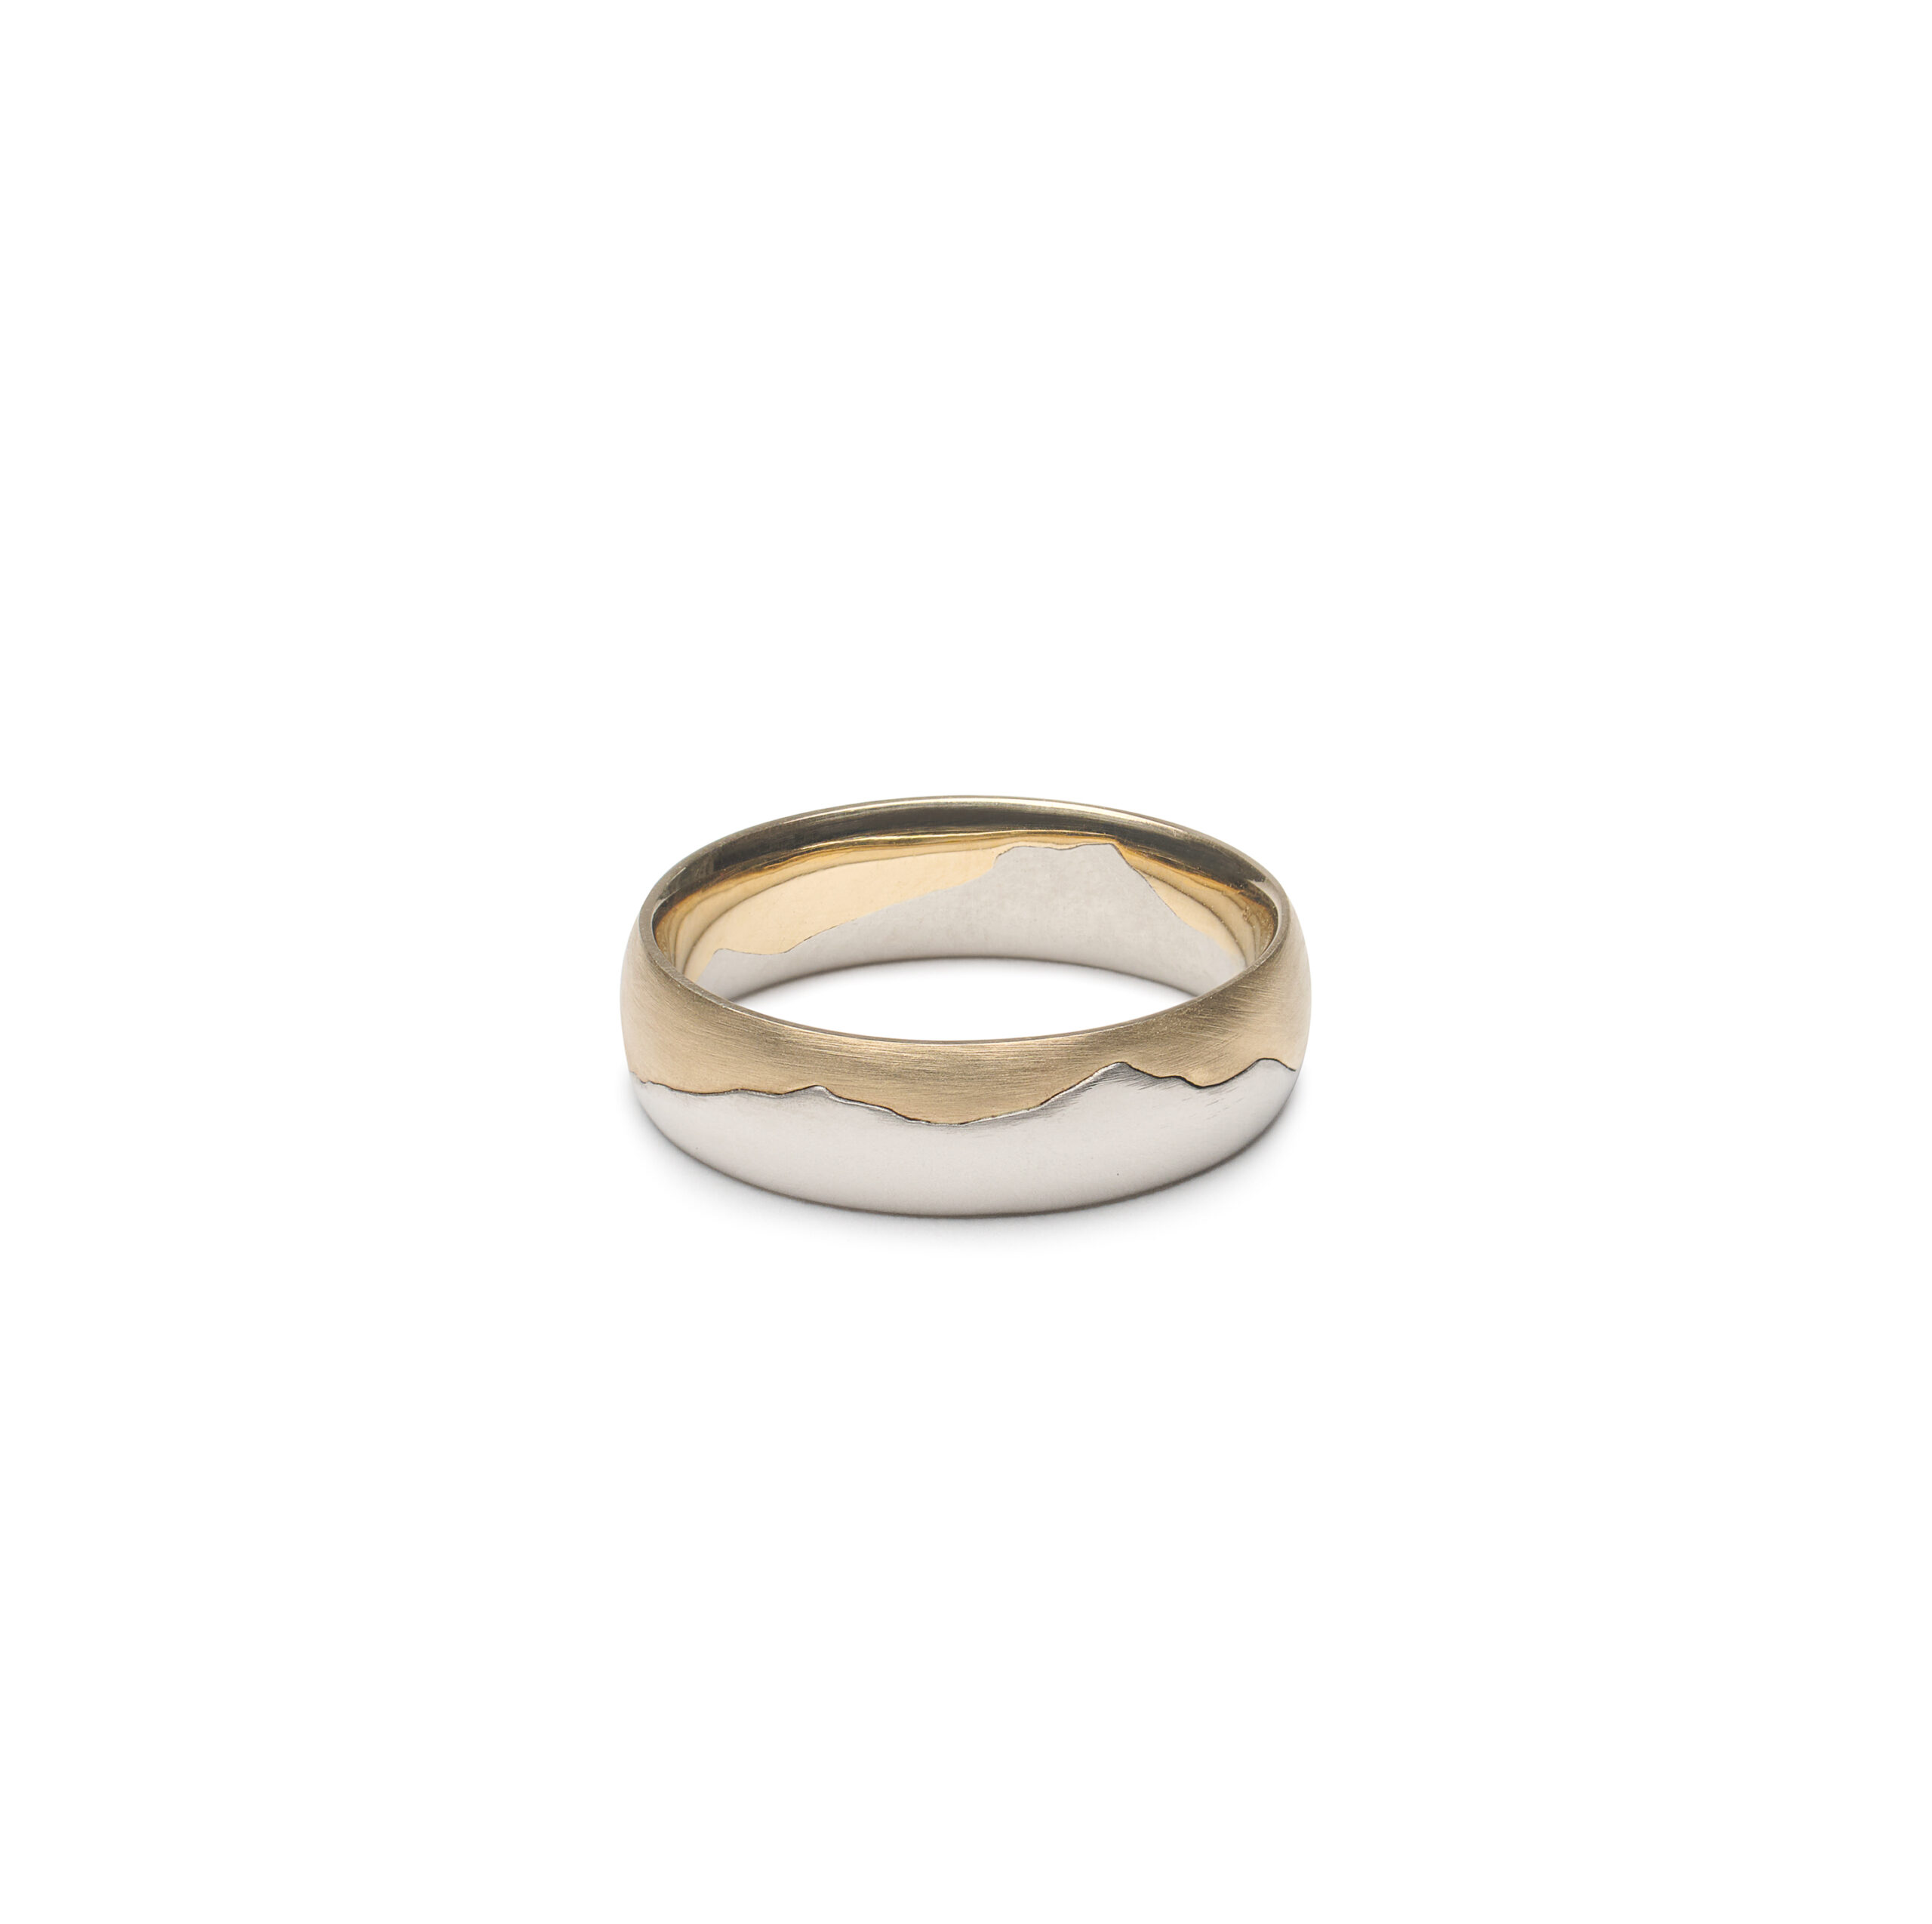 Dual metal ring depicting the green mountain in Vermont with mountains in white gold and the sky in yellow gold and a smooth finish